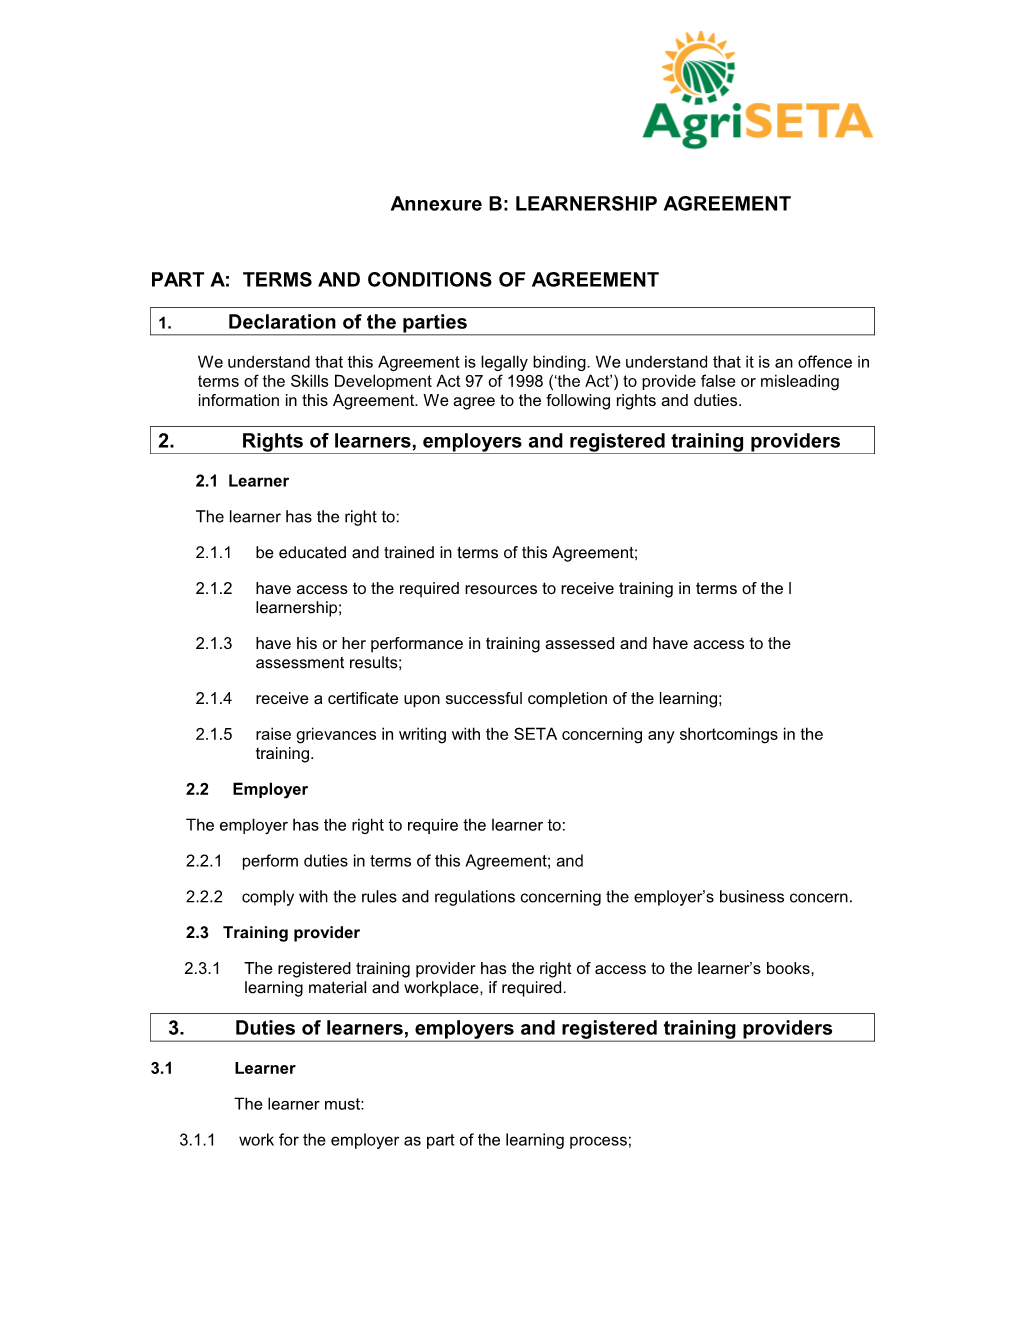 Part A: Terms and Conditionsof Agreement